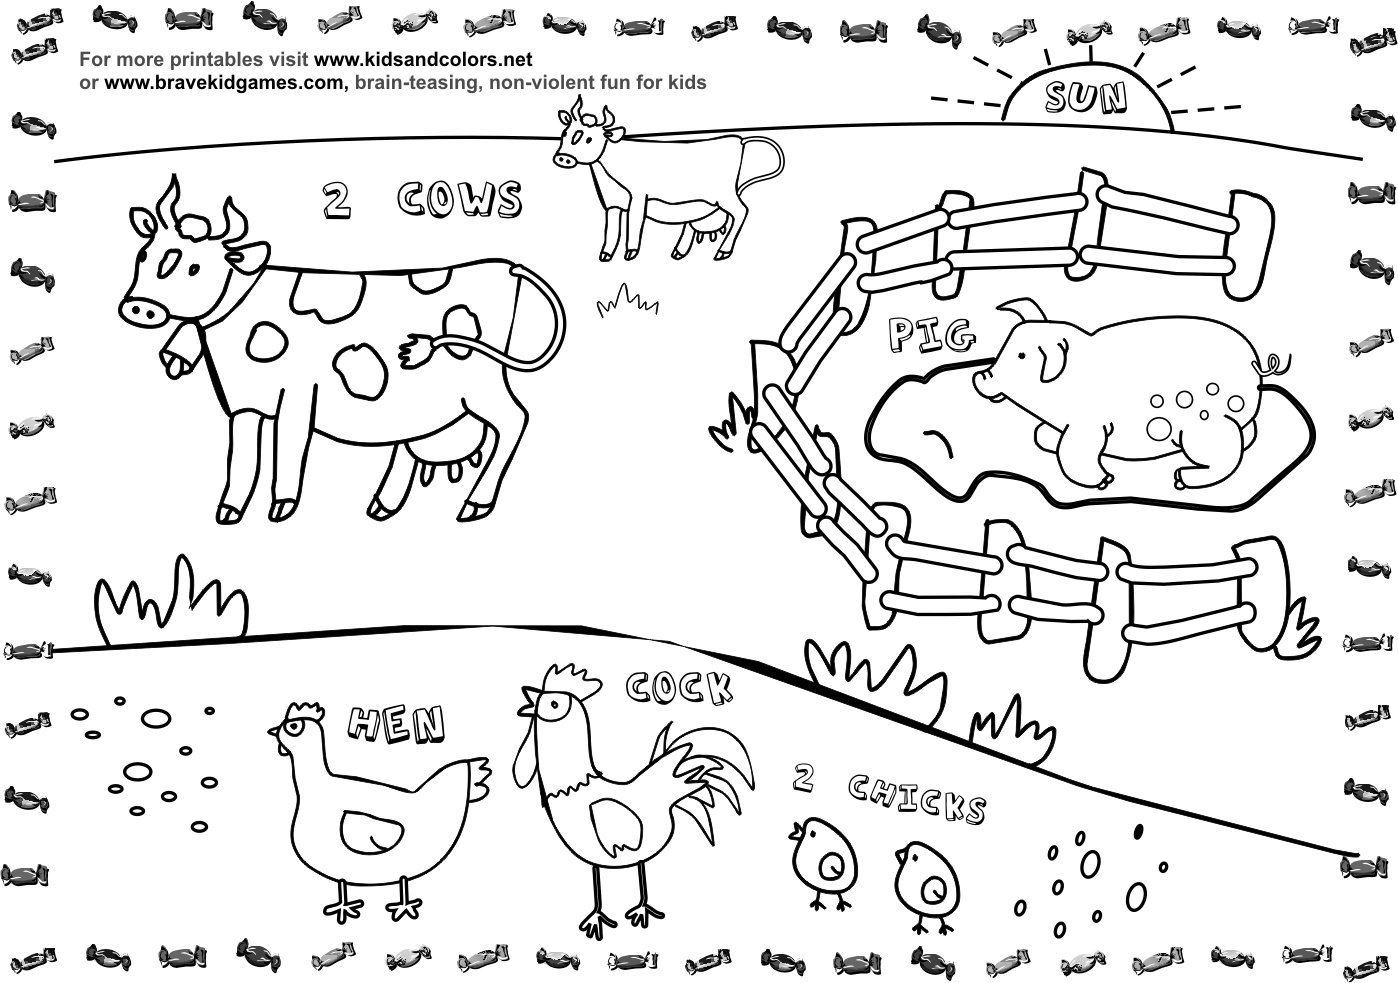 Image Coloring Pages Of Farm Animals For Preschoolers-3546 - Max ...